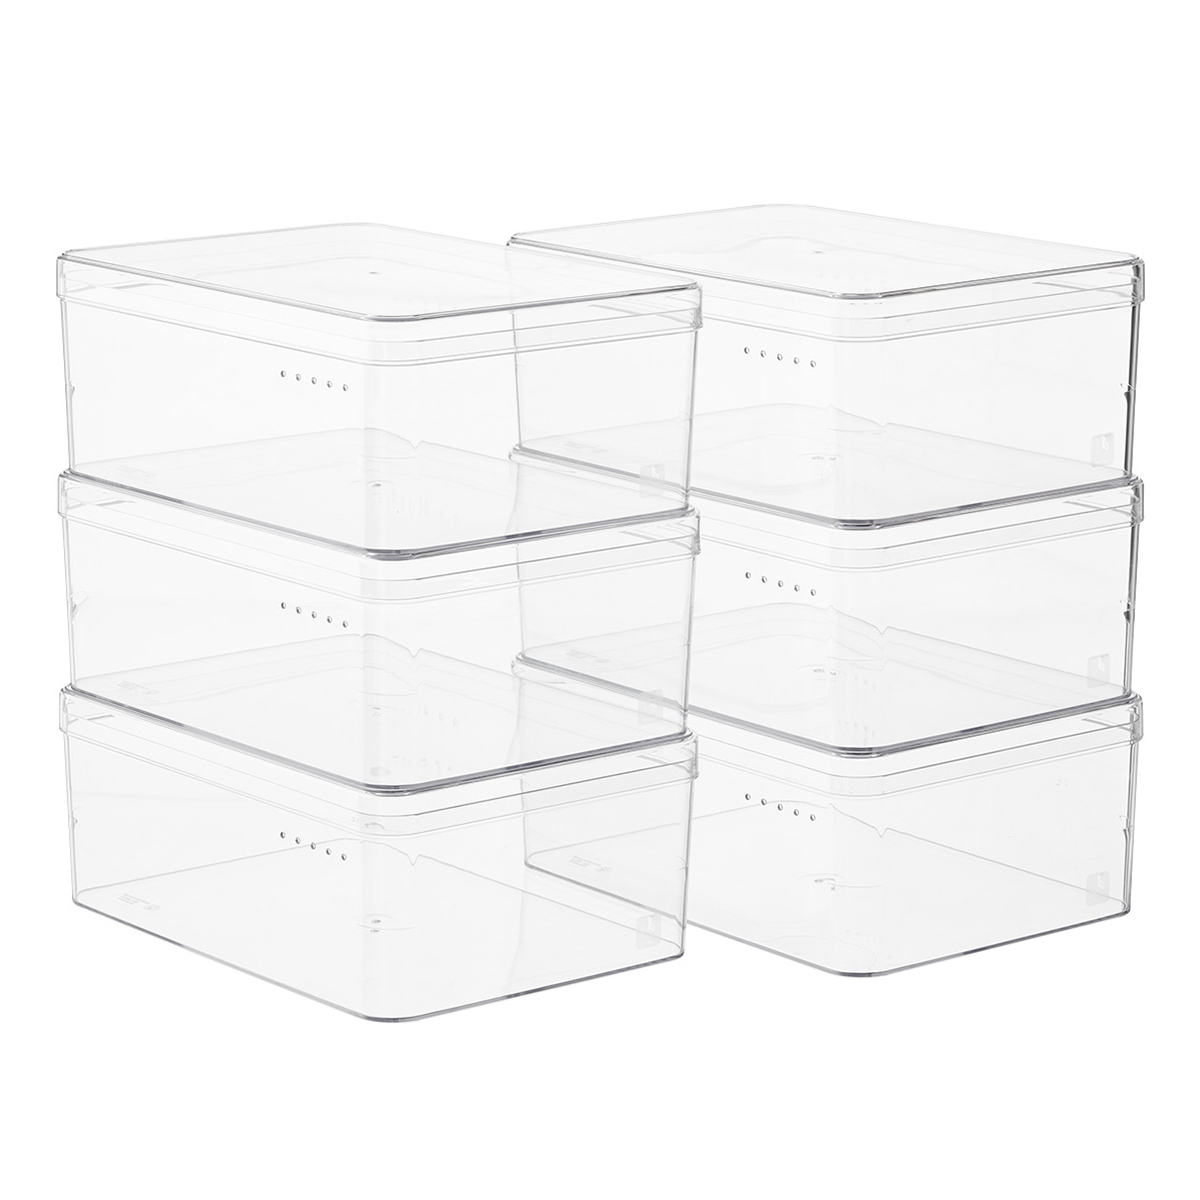 The Container Store Case of 6 Large Shoe Box Clear